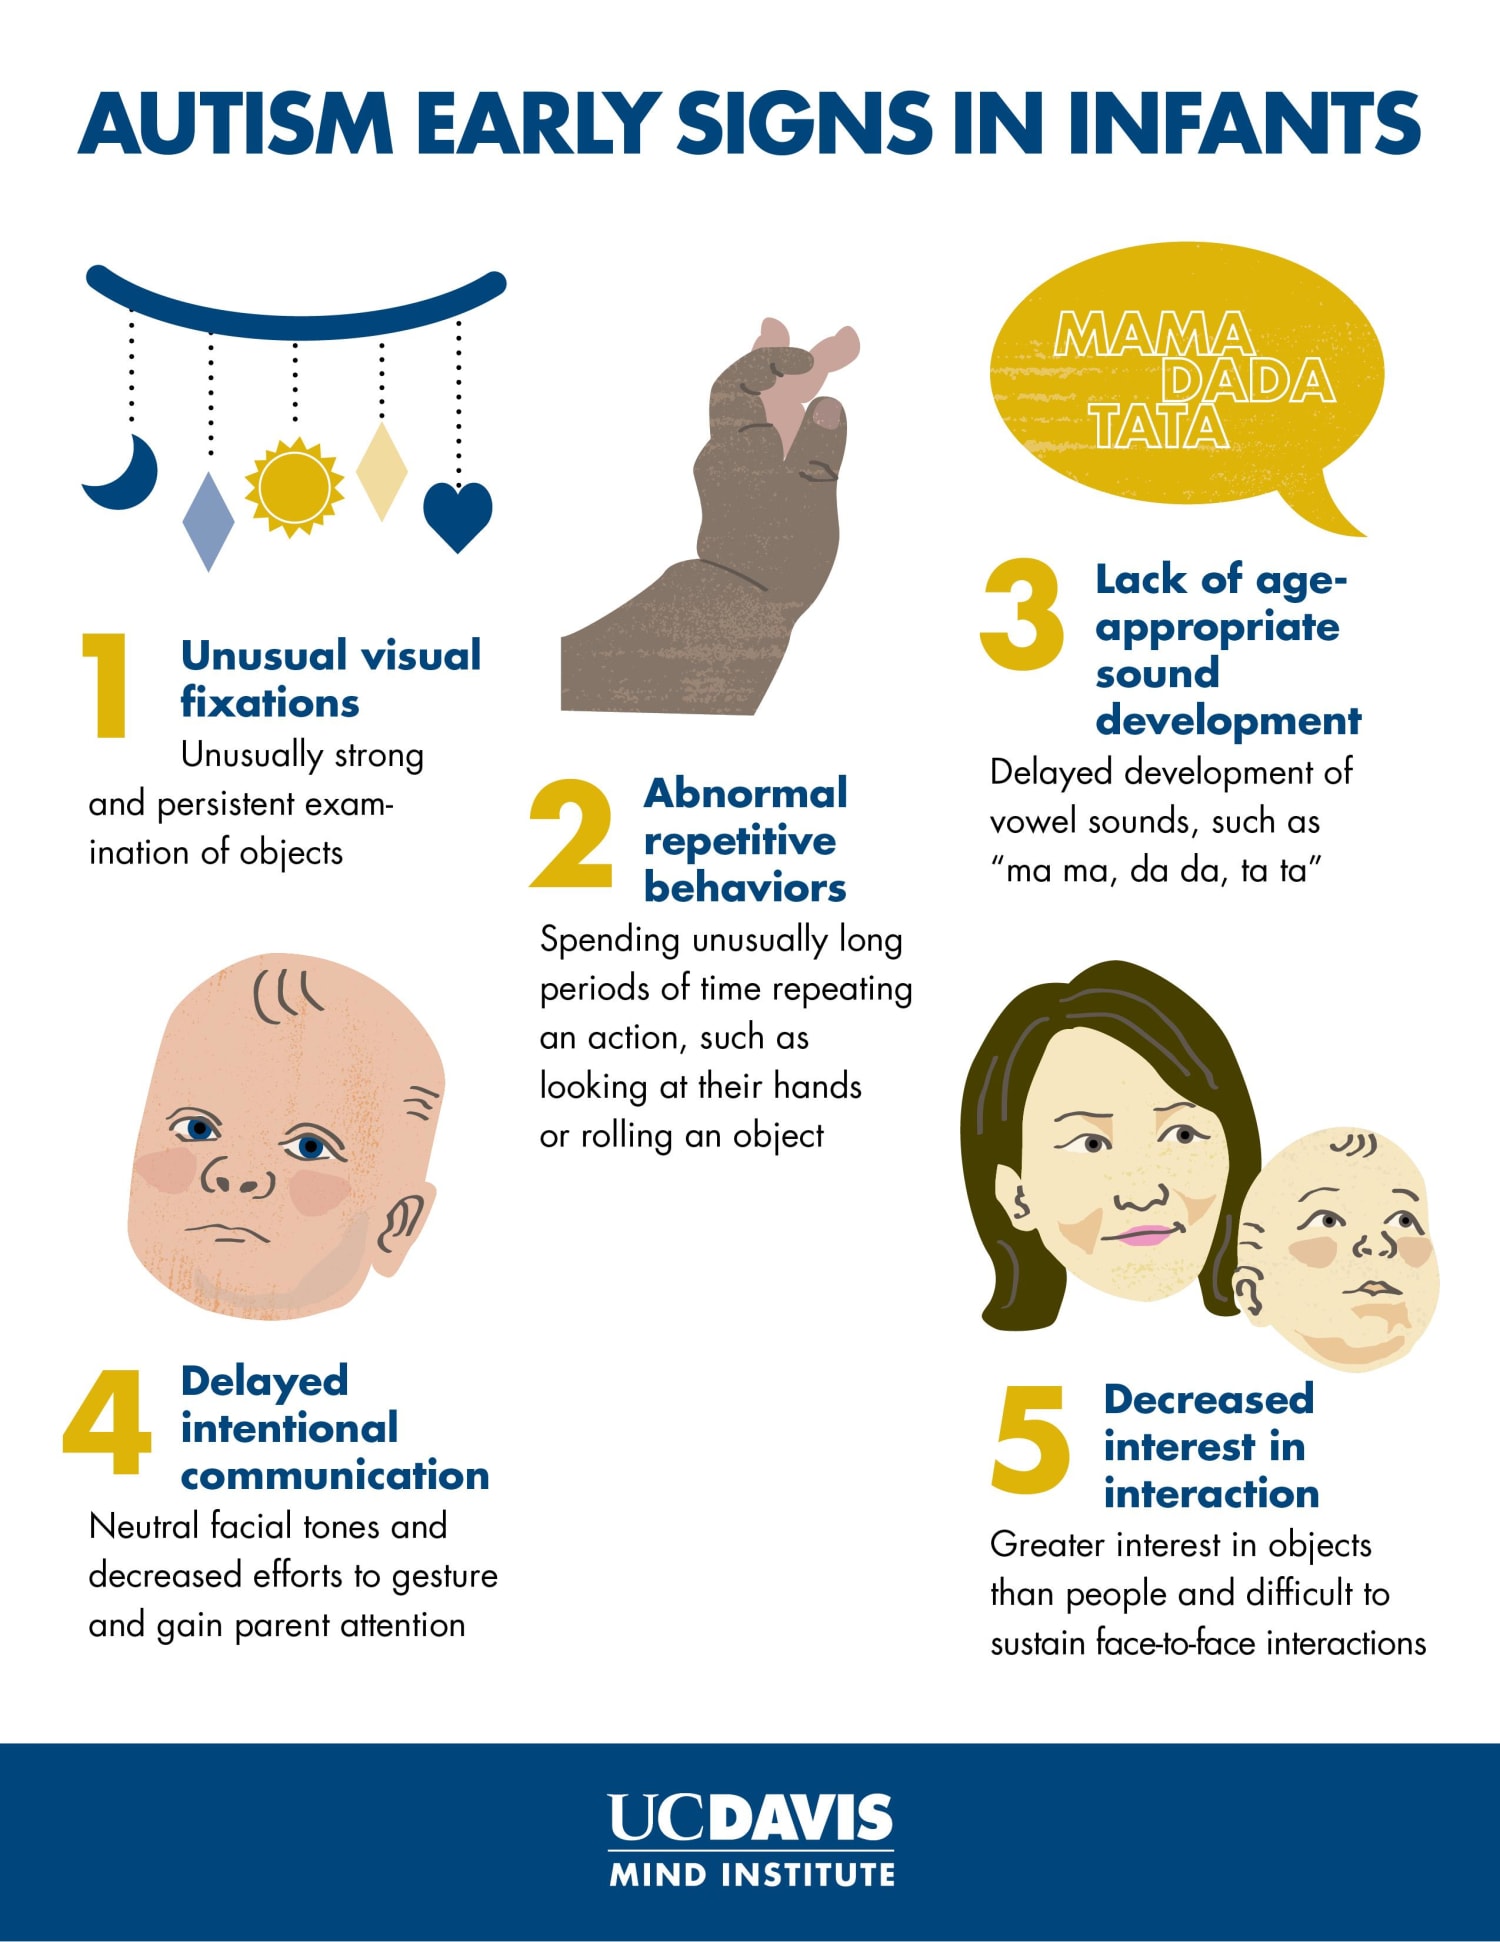 What are the early signs of autism in a baby?